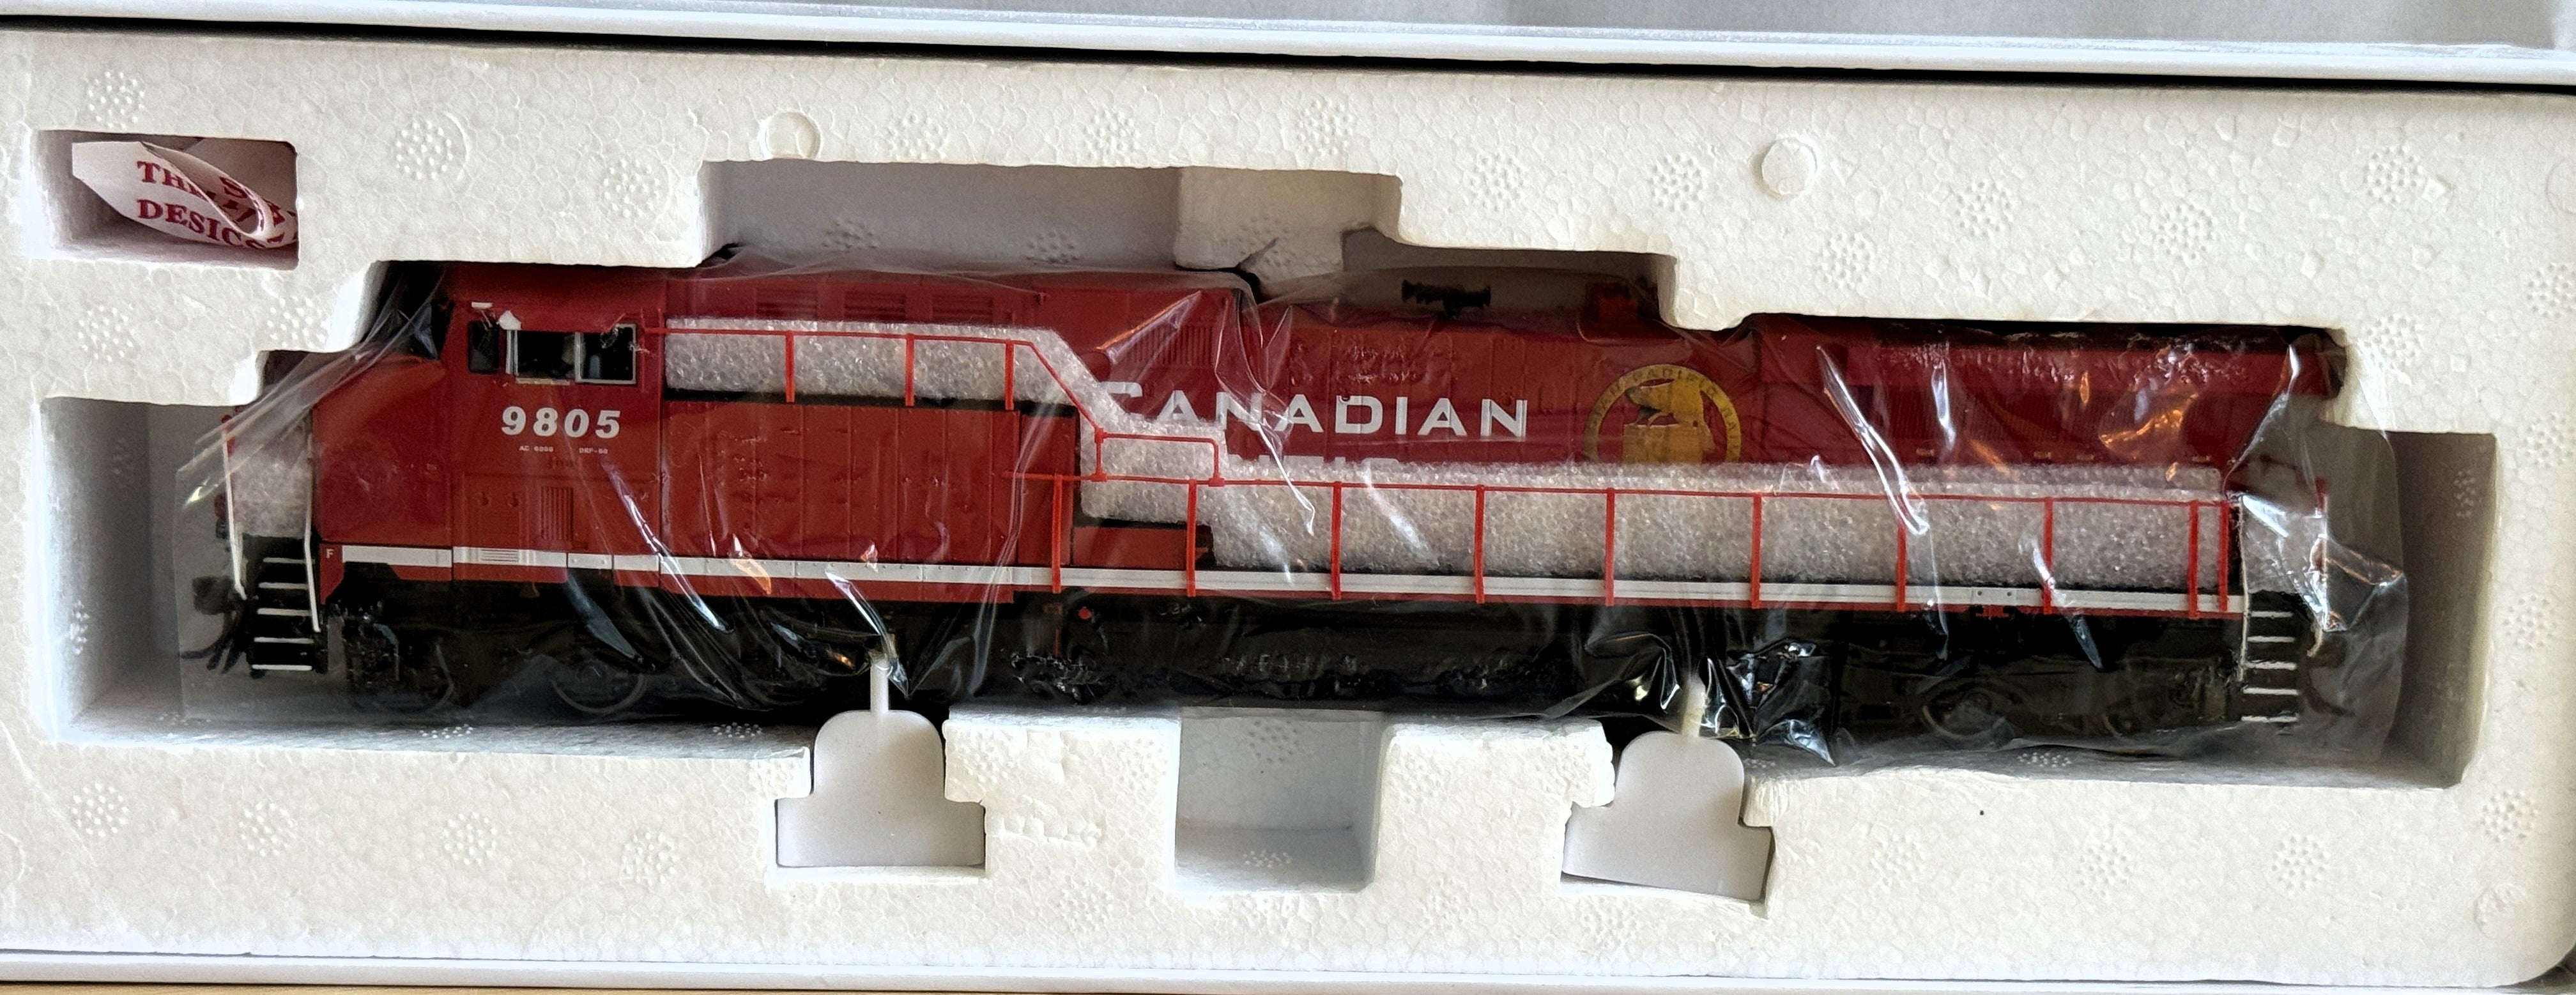 Broadway Limited 2127 HO GE AC6000 "Canadian Pacific" #9805 w Paragon2 (DCC)-Second hand-M1453